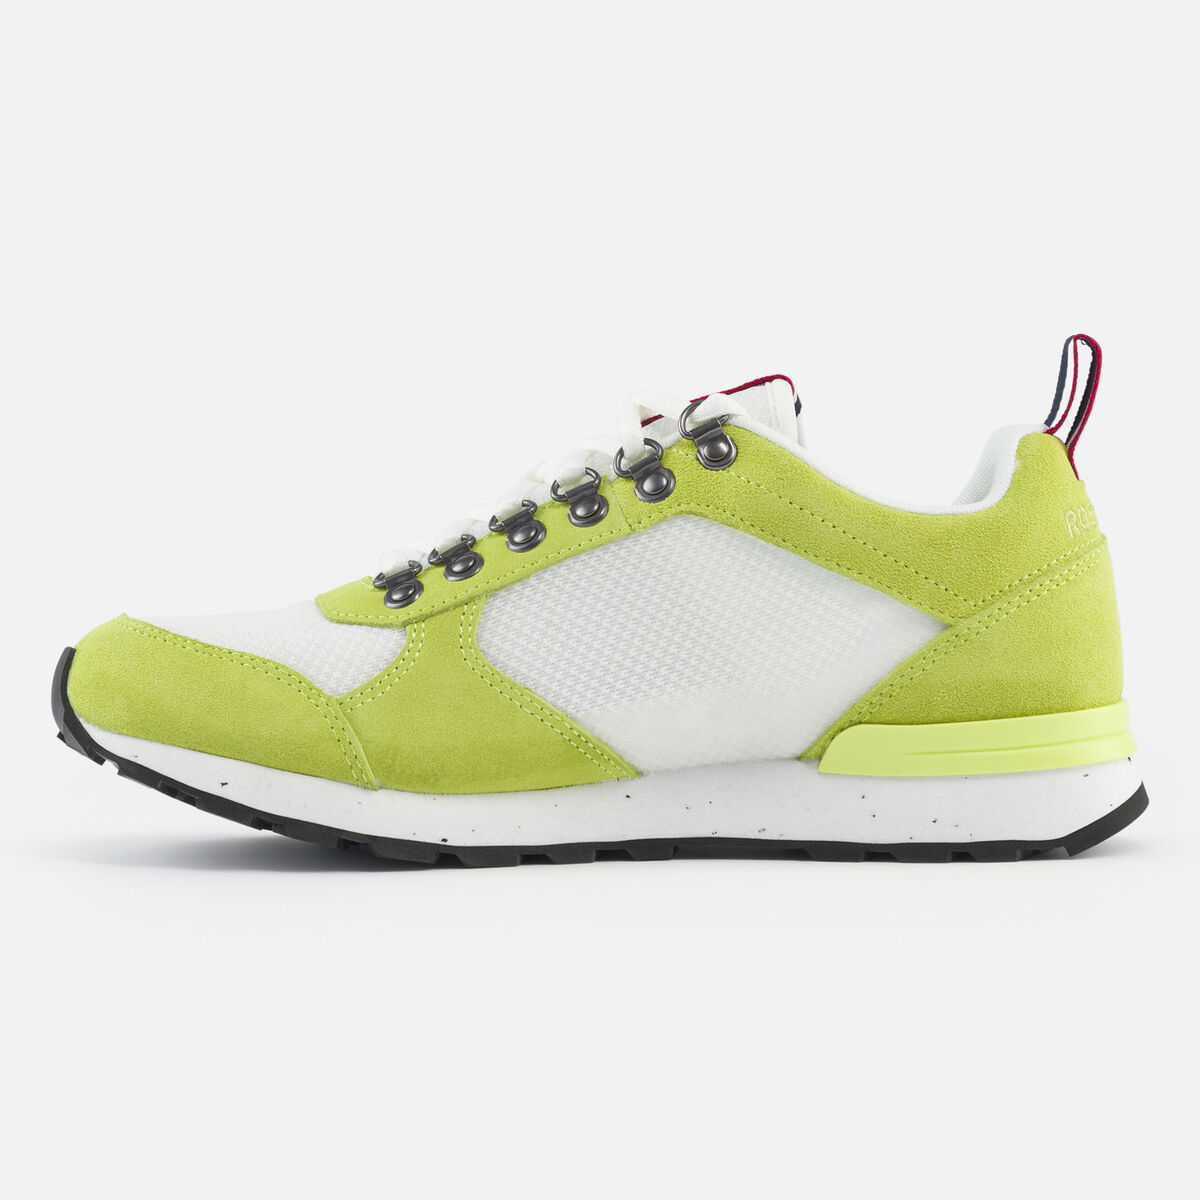 Women's Heritage Special white citron sneakers